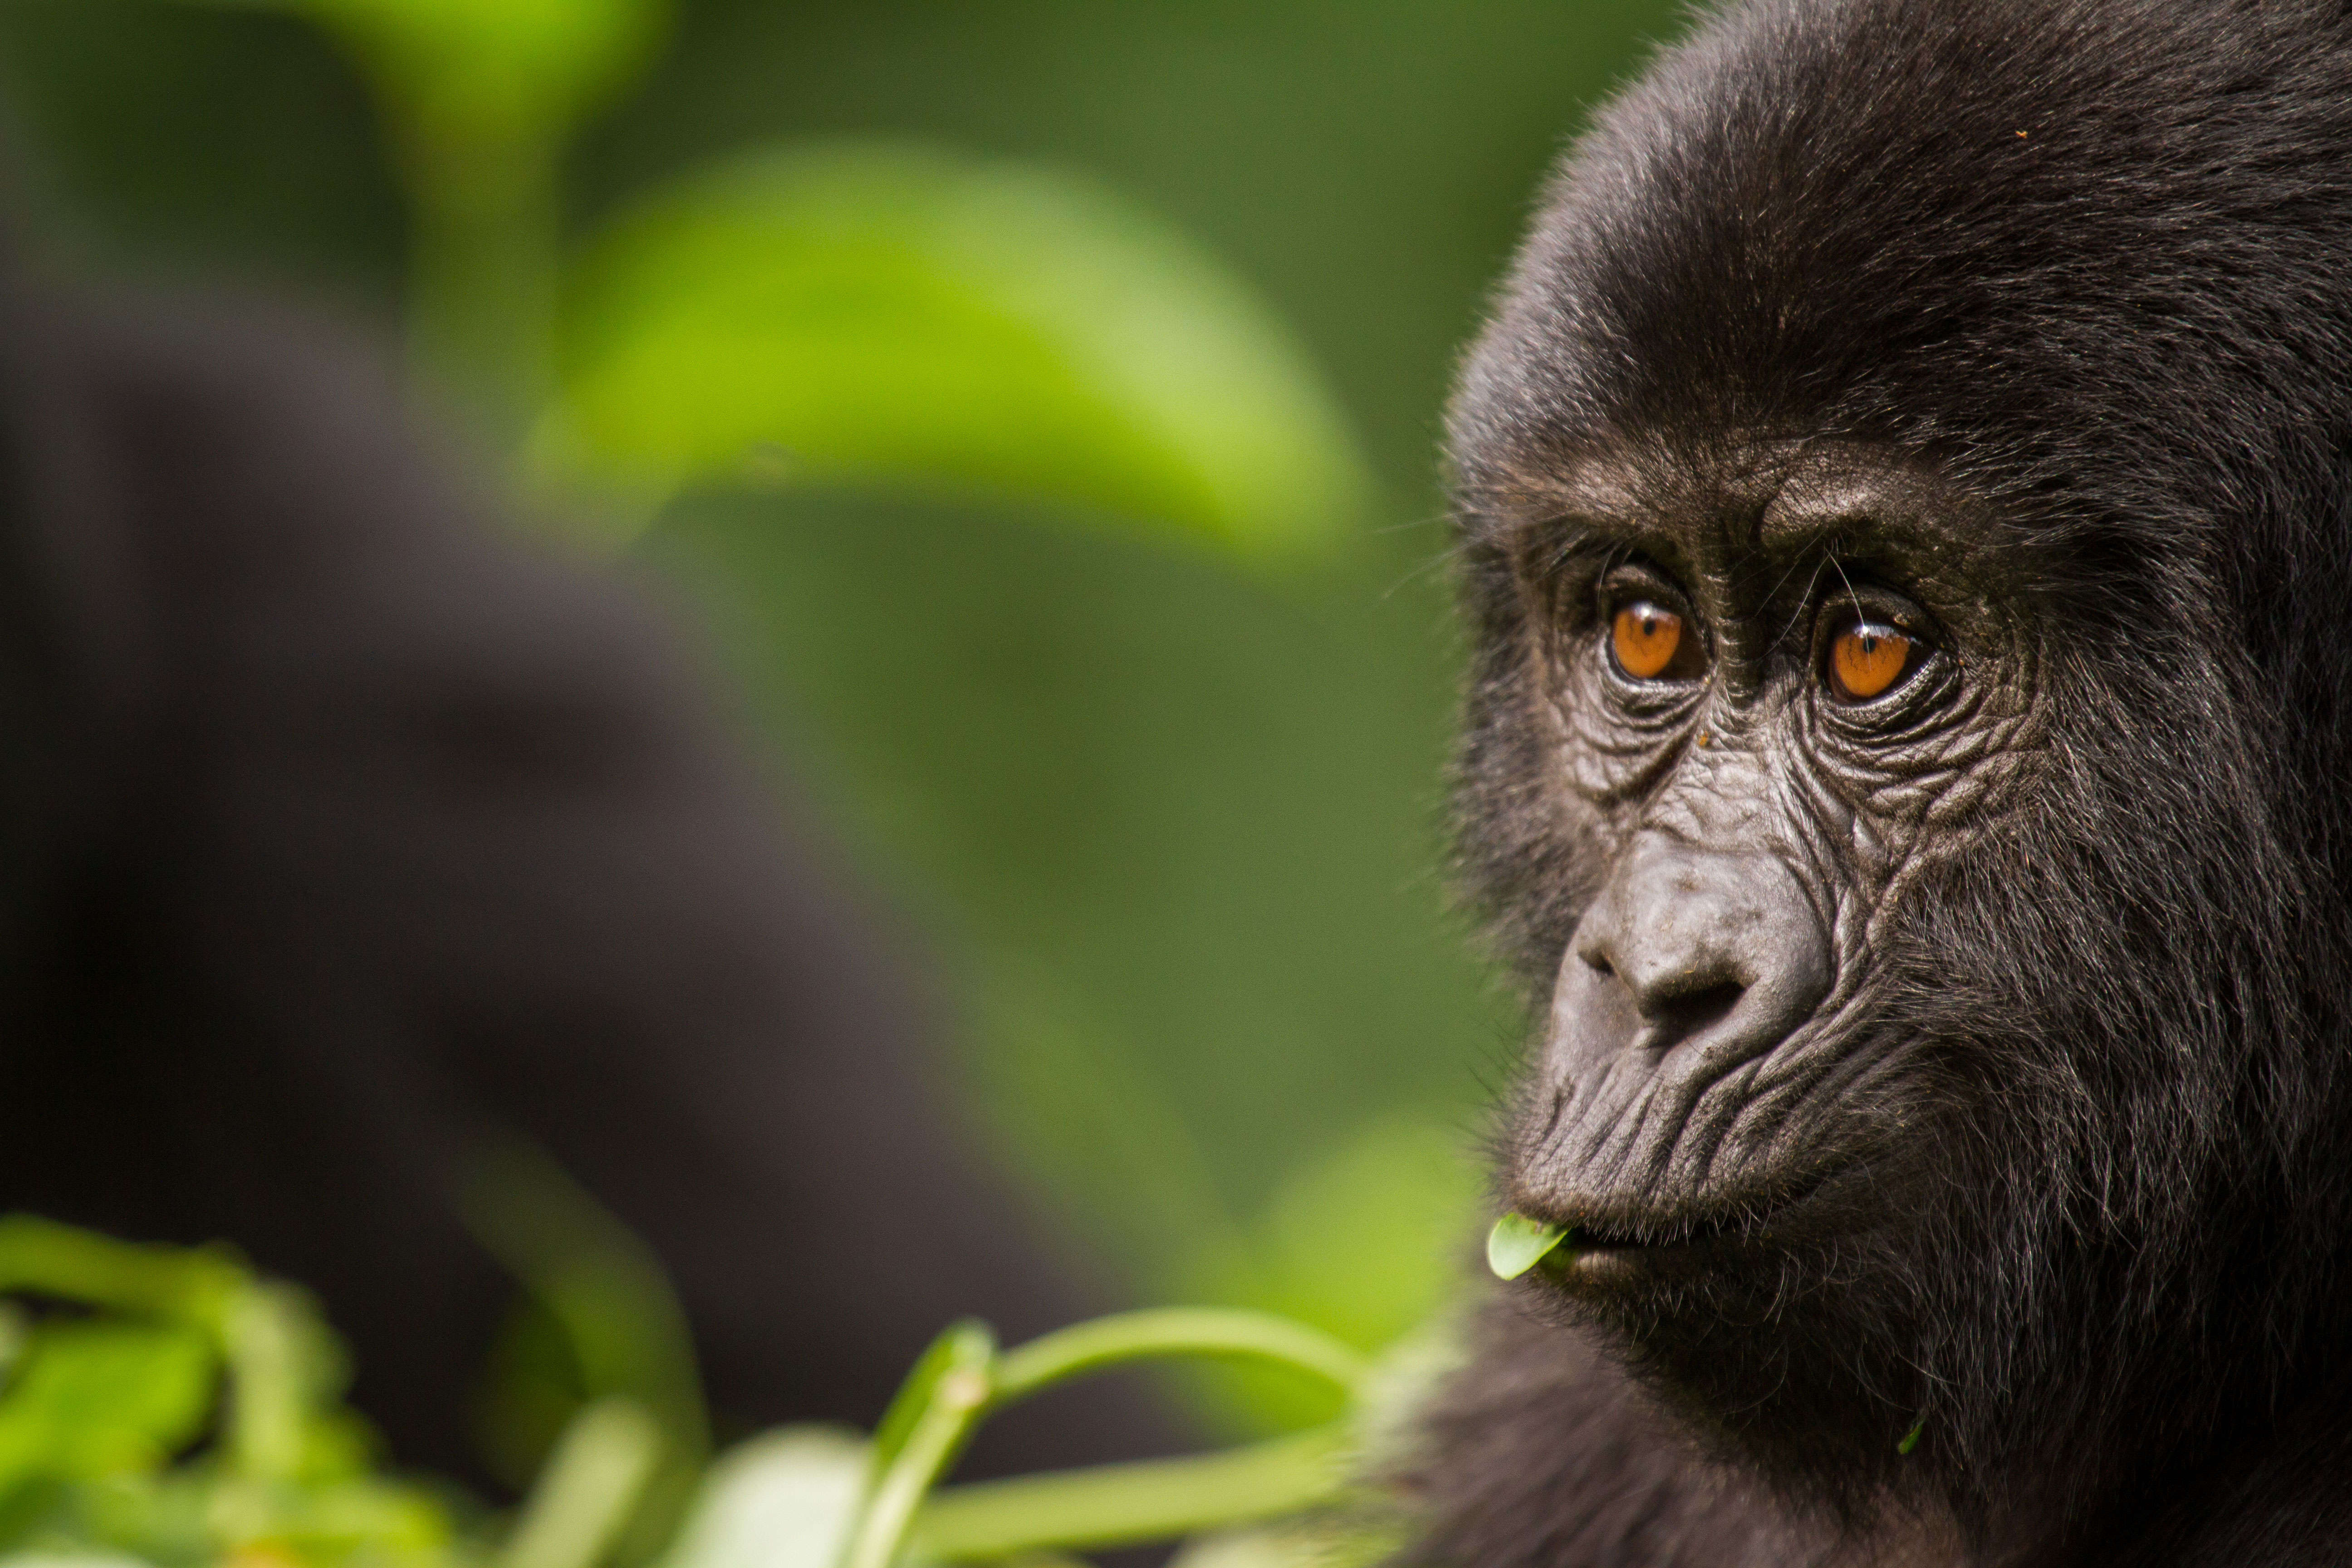 June is a great time to see mountain gorillas in Rwanda